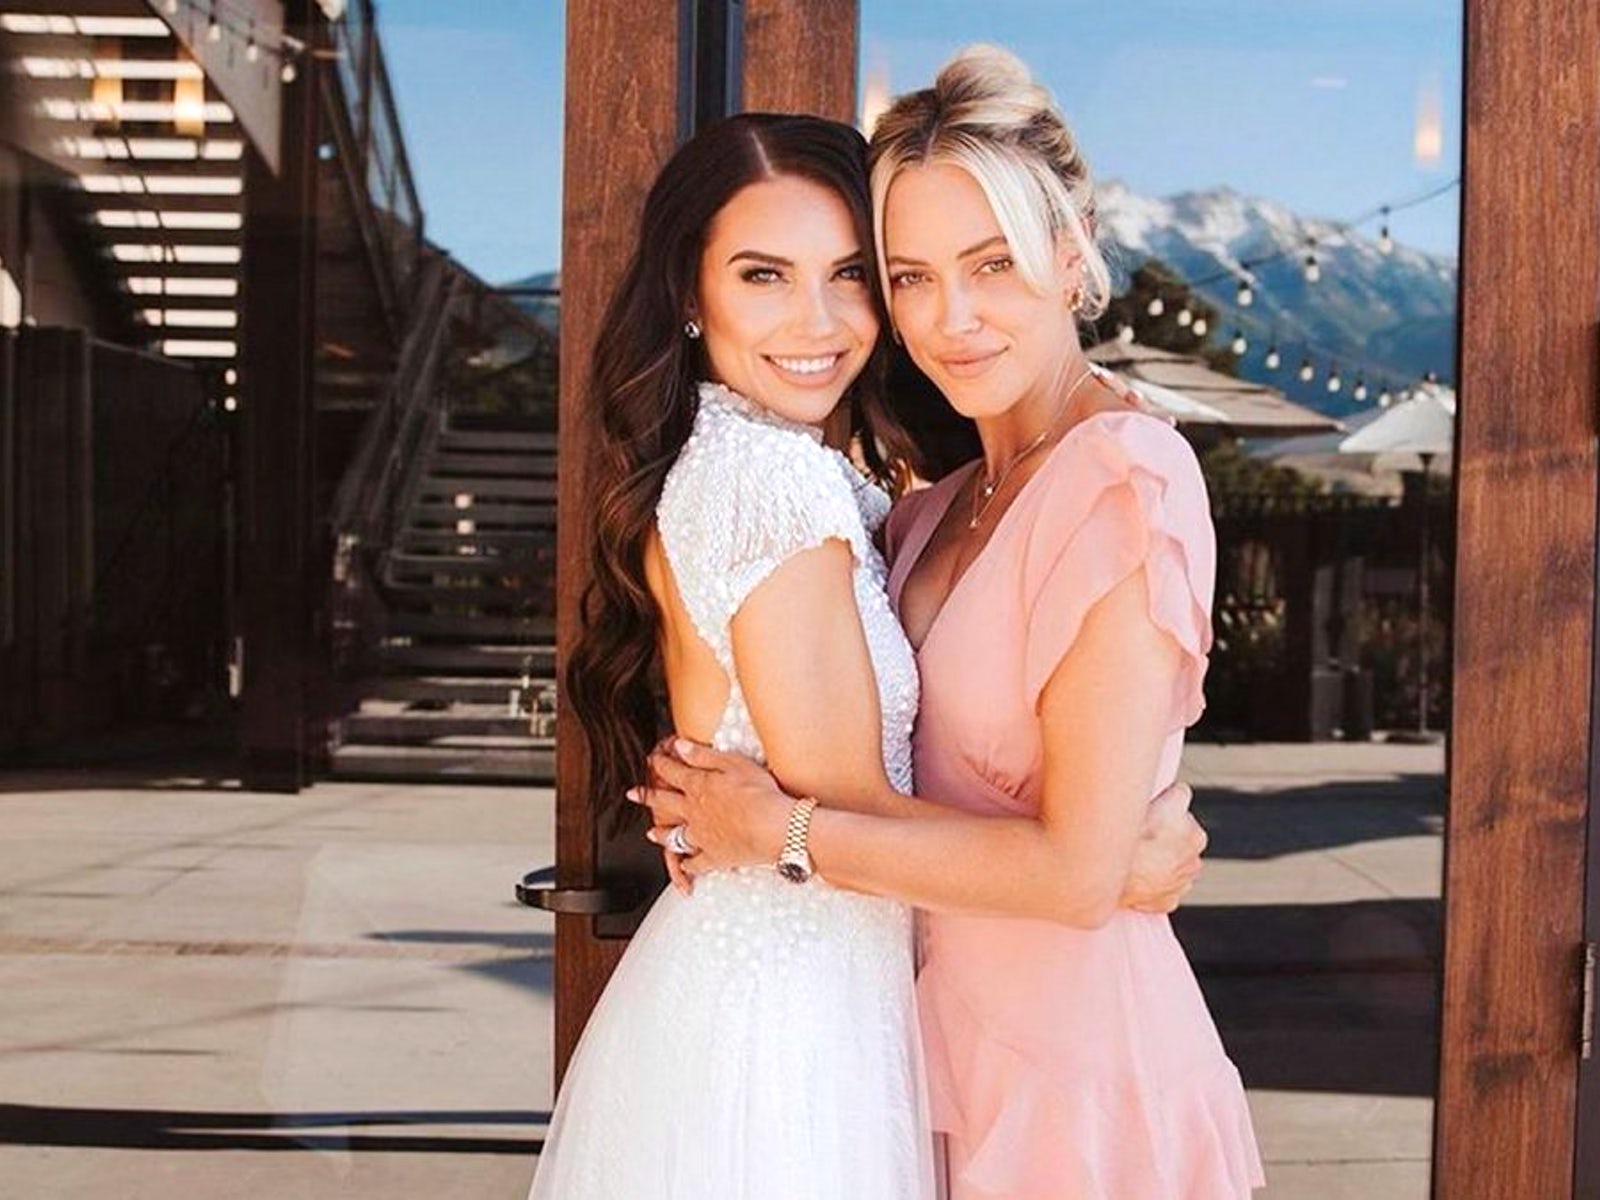 'Dancing with the Stars' pros Jenna Johnson and Peta